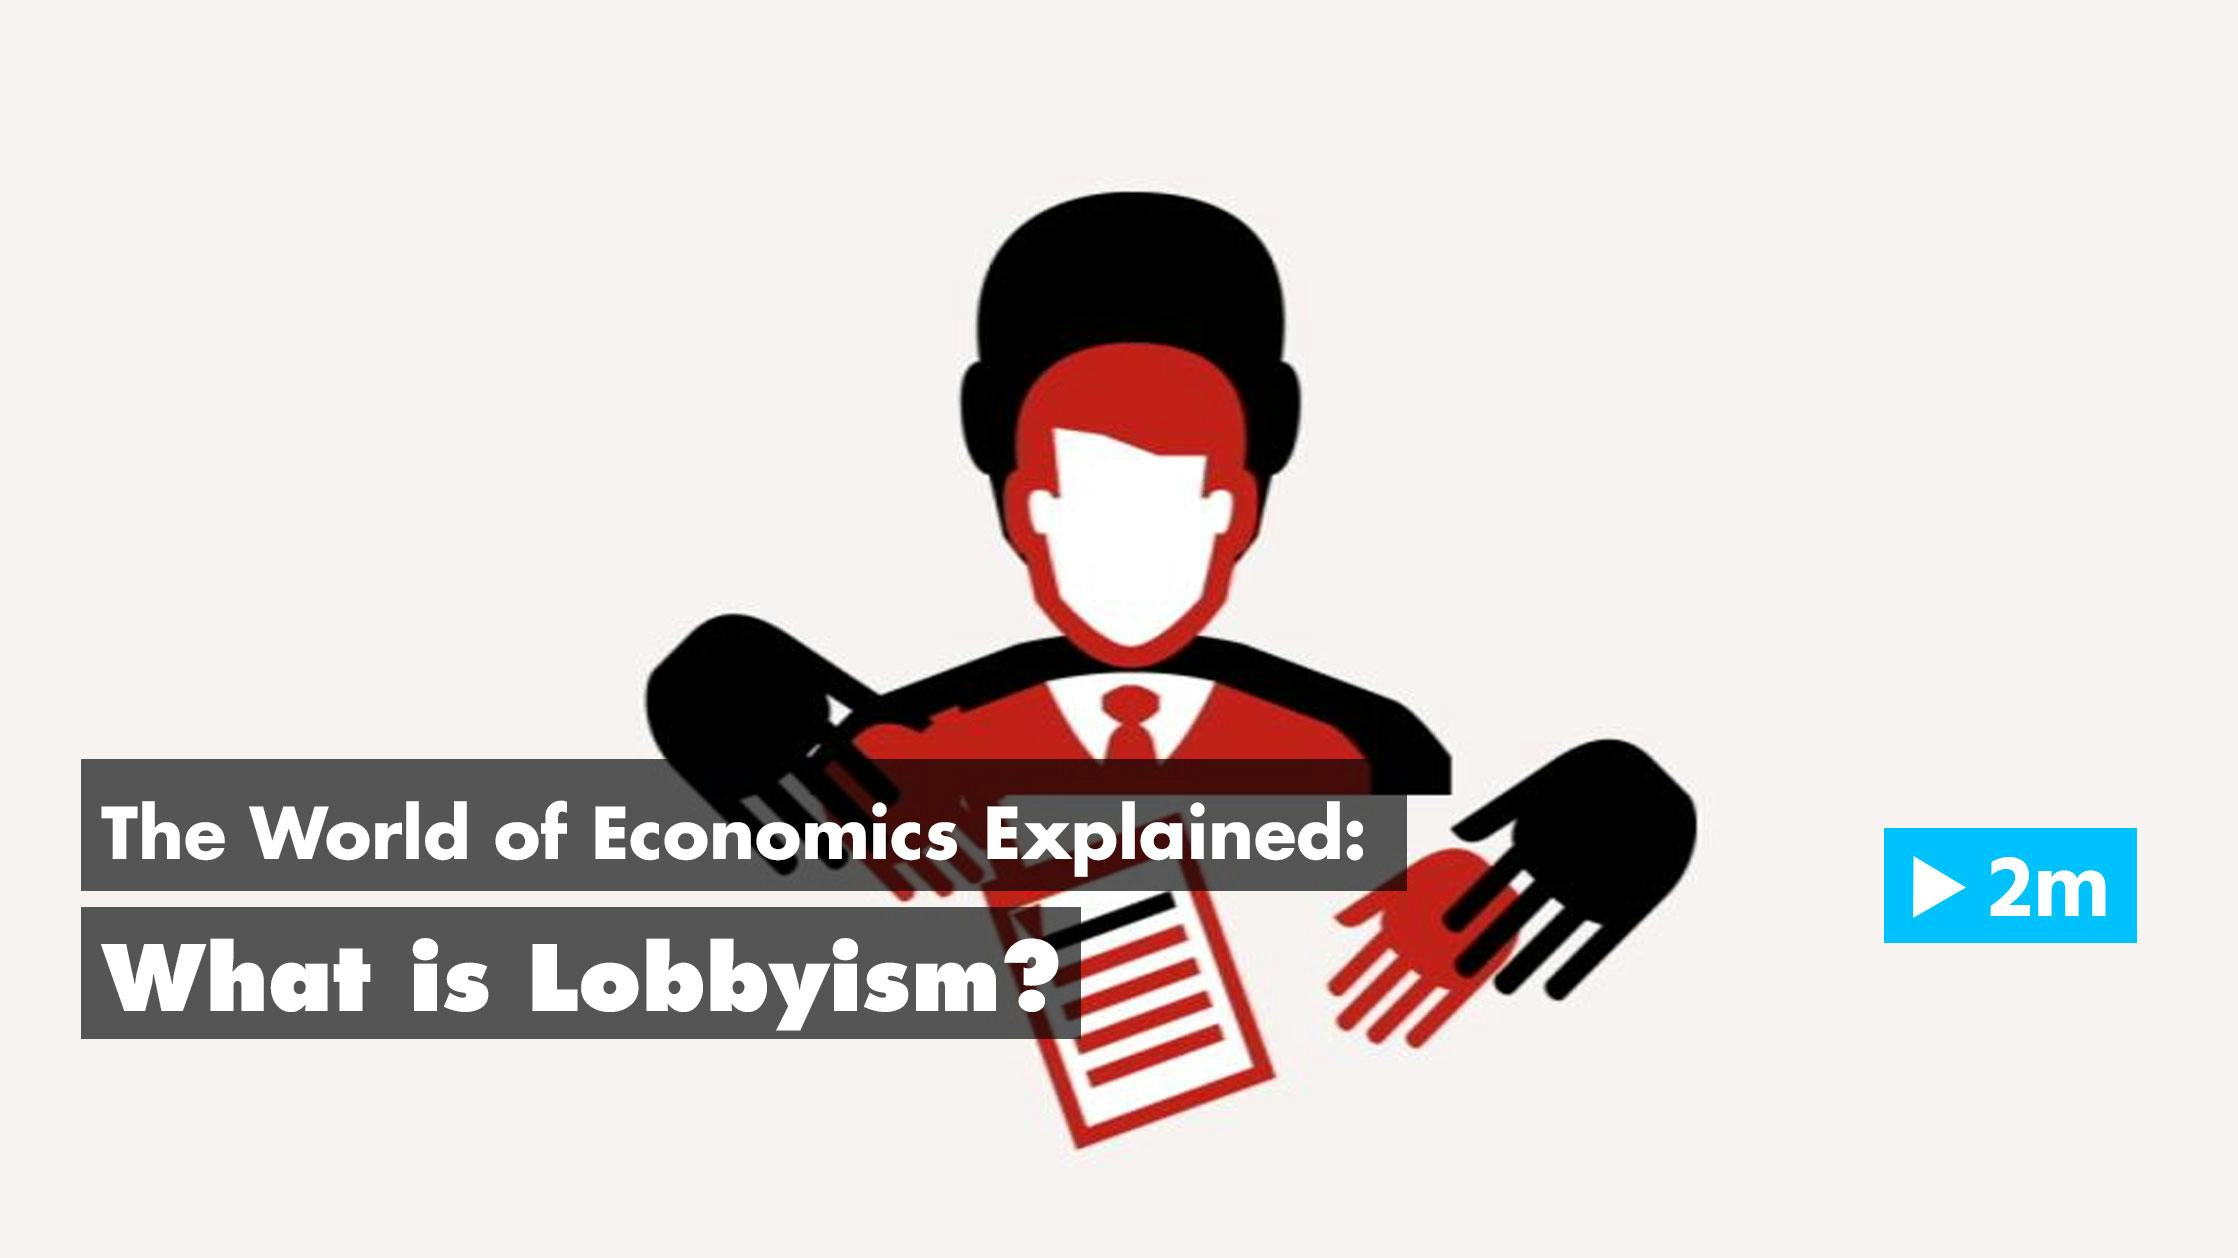 The World of Economics Explained: What is Lobbyism?